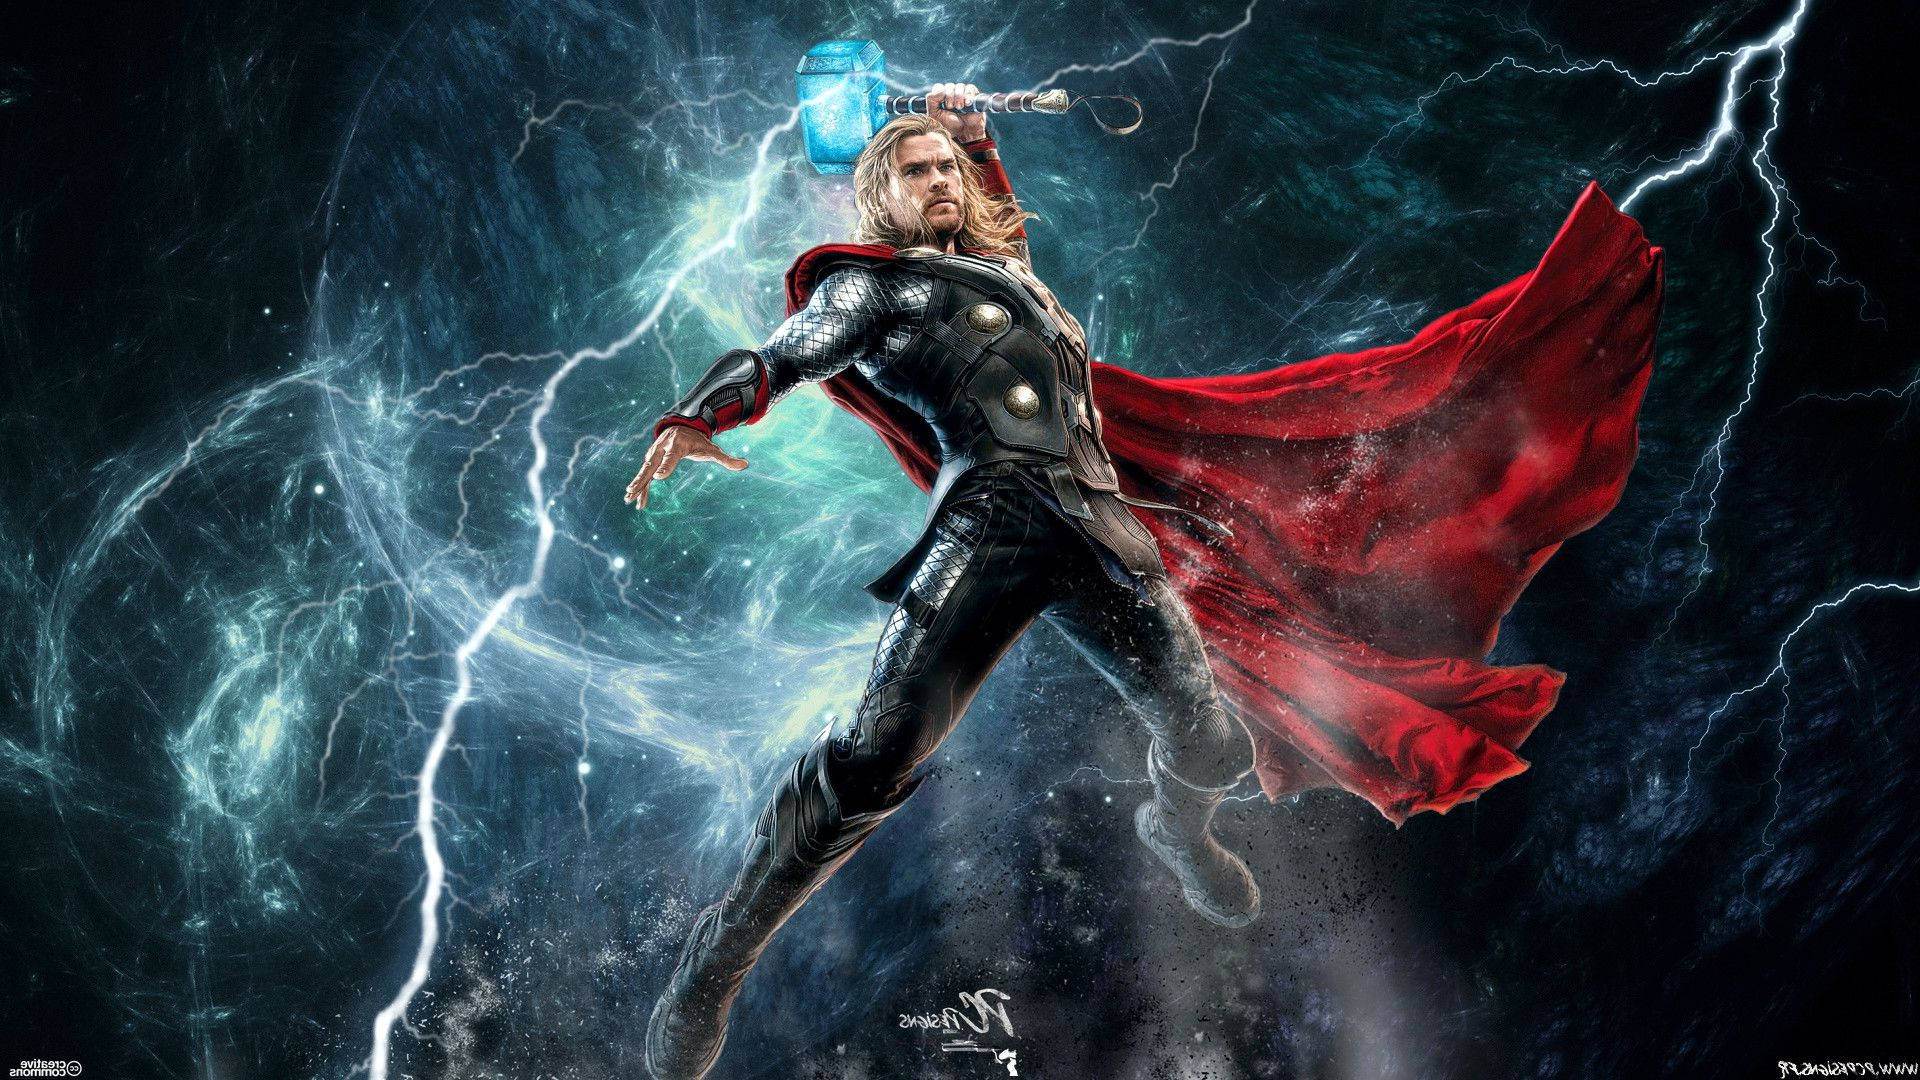 "Thrusting His Hammer into the Air and Releasing a Storm of Lightning, Thor Embodies the Power of Nature" Wallpaper